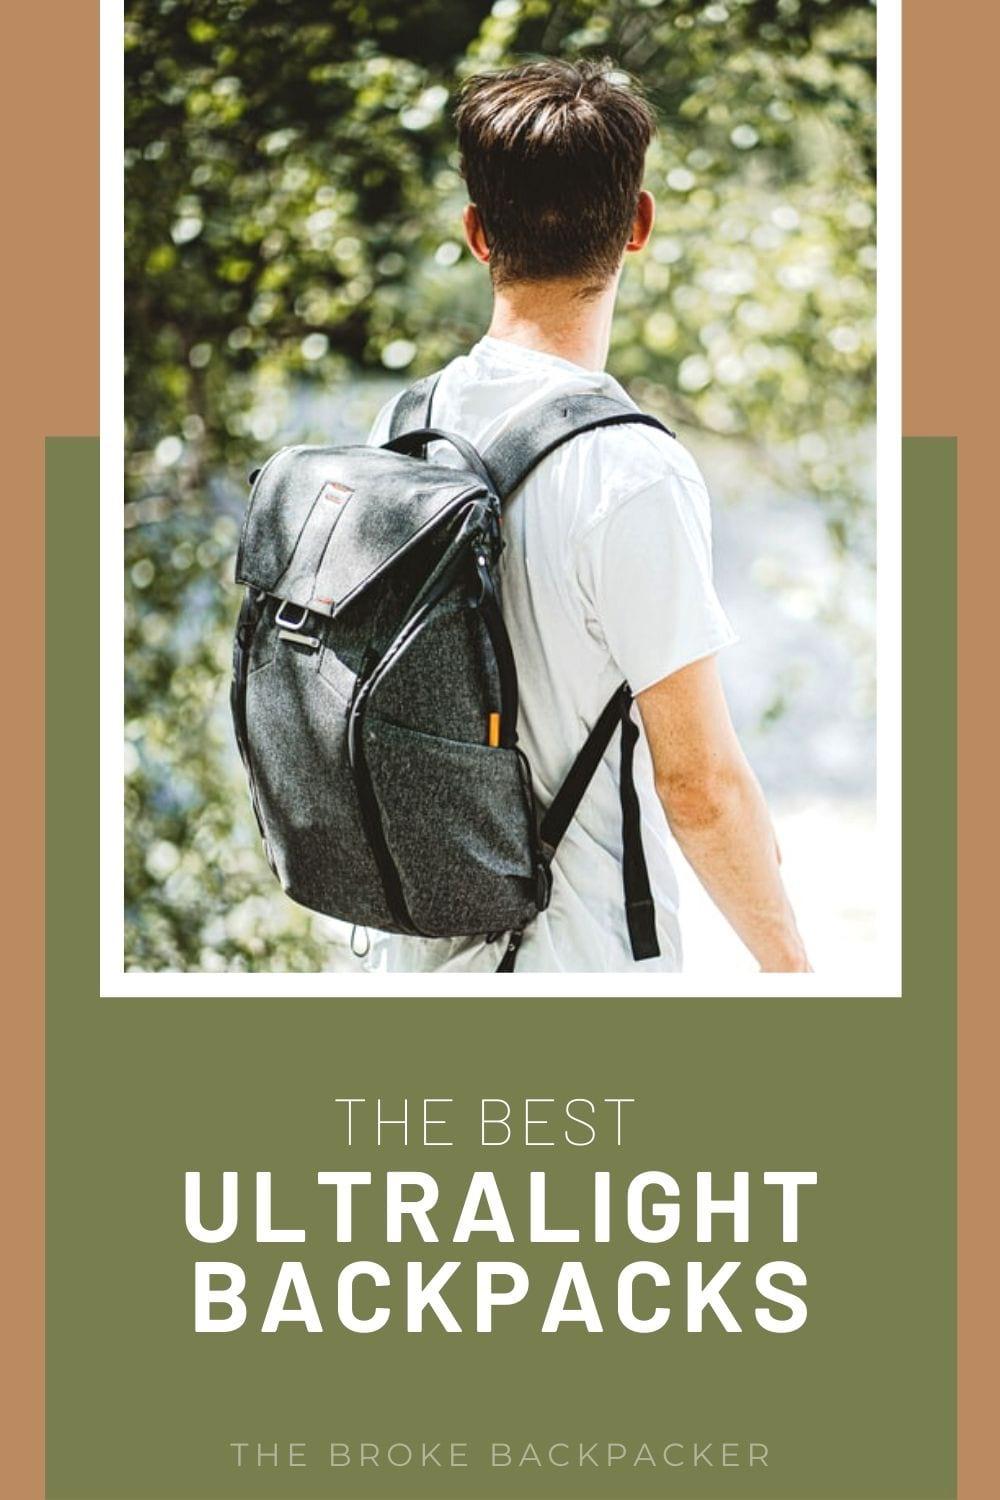 The 10 best ultralight hiking backpacks that won’t stress your back